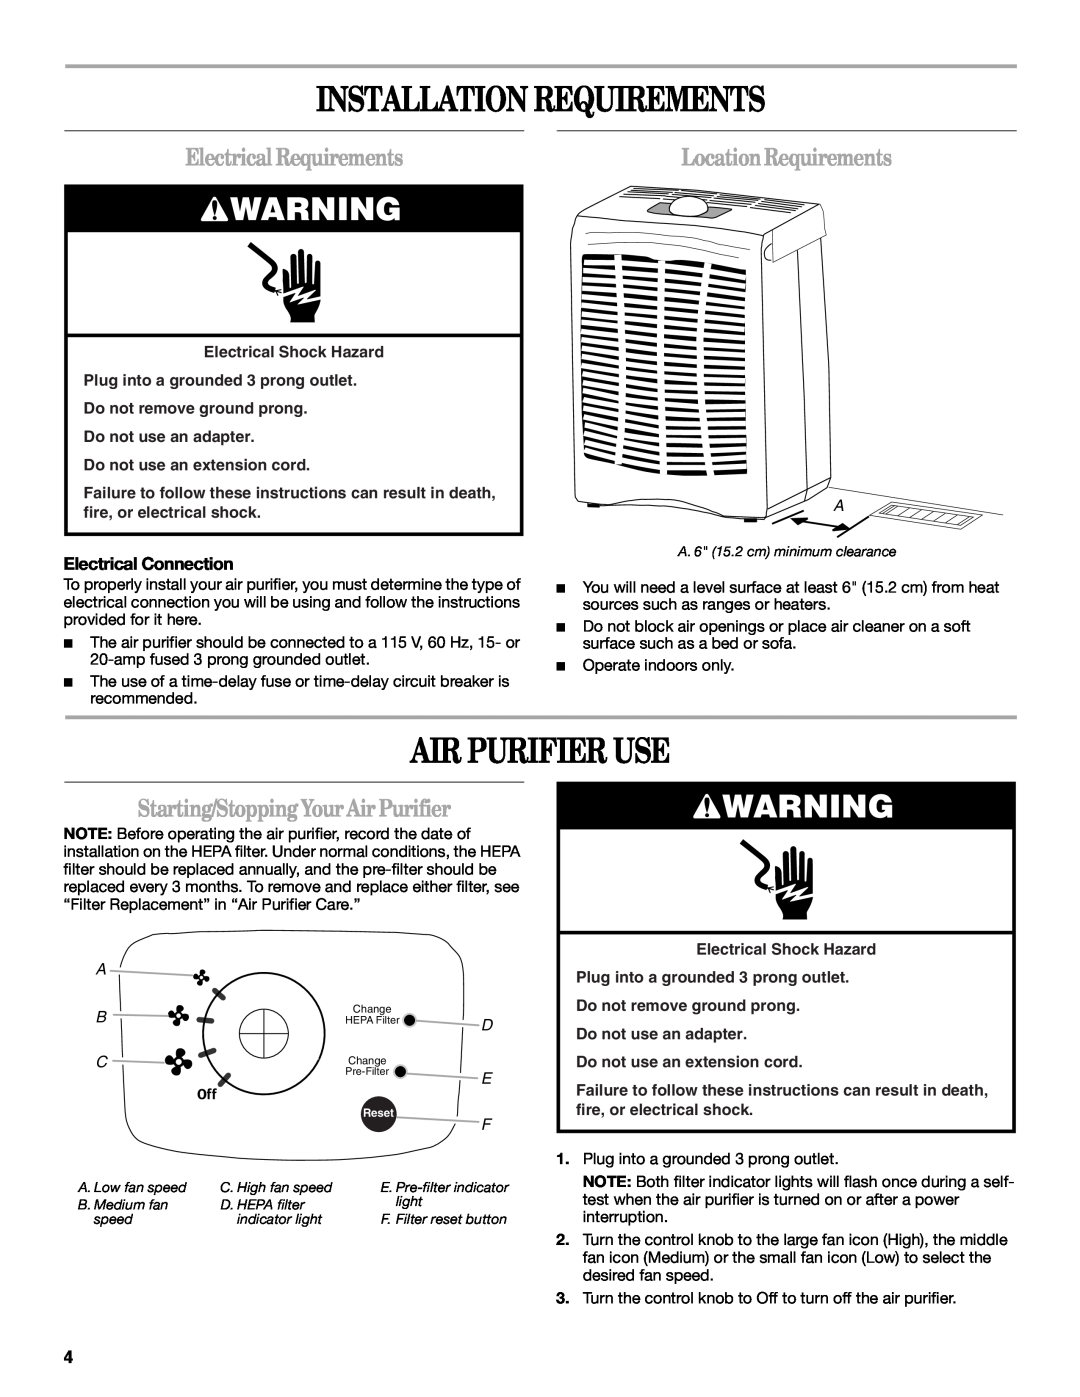 Whirlpool AP250, AP450 manual Installation Requirements, Air Purifier Use, Electrical Requirements, LocationRequirements 